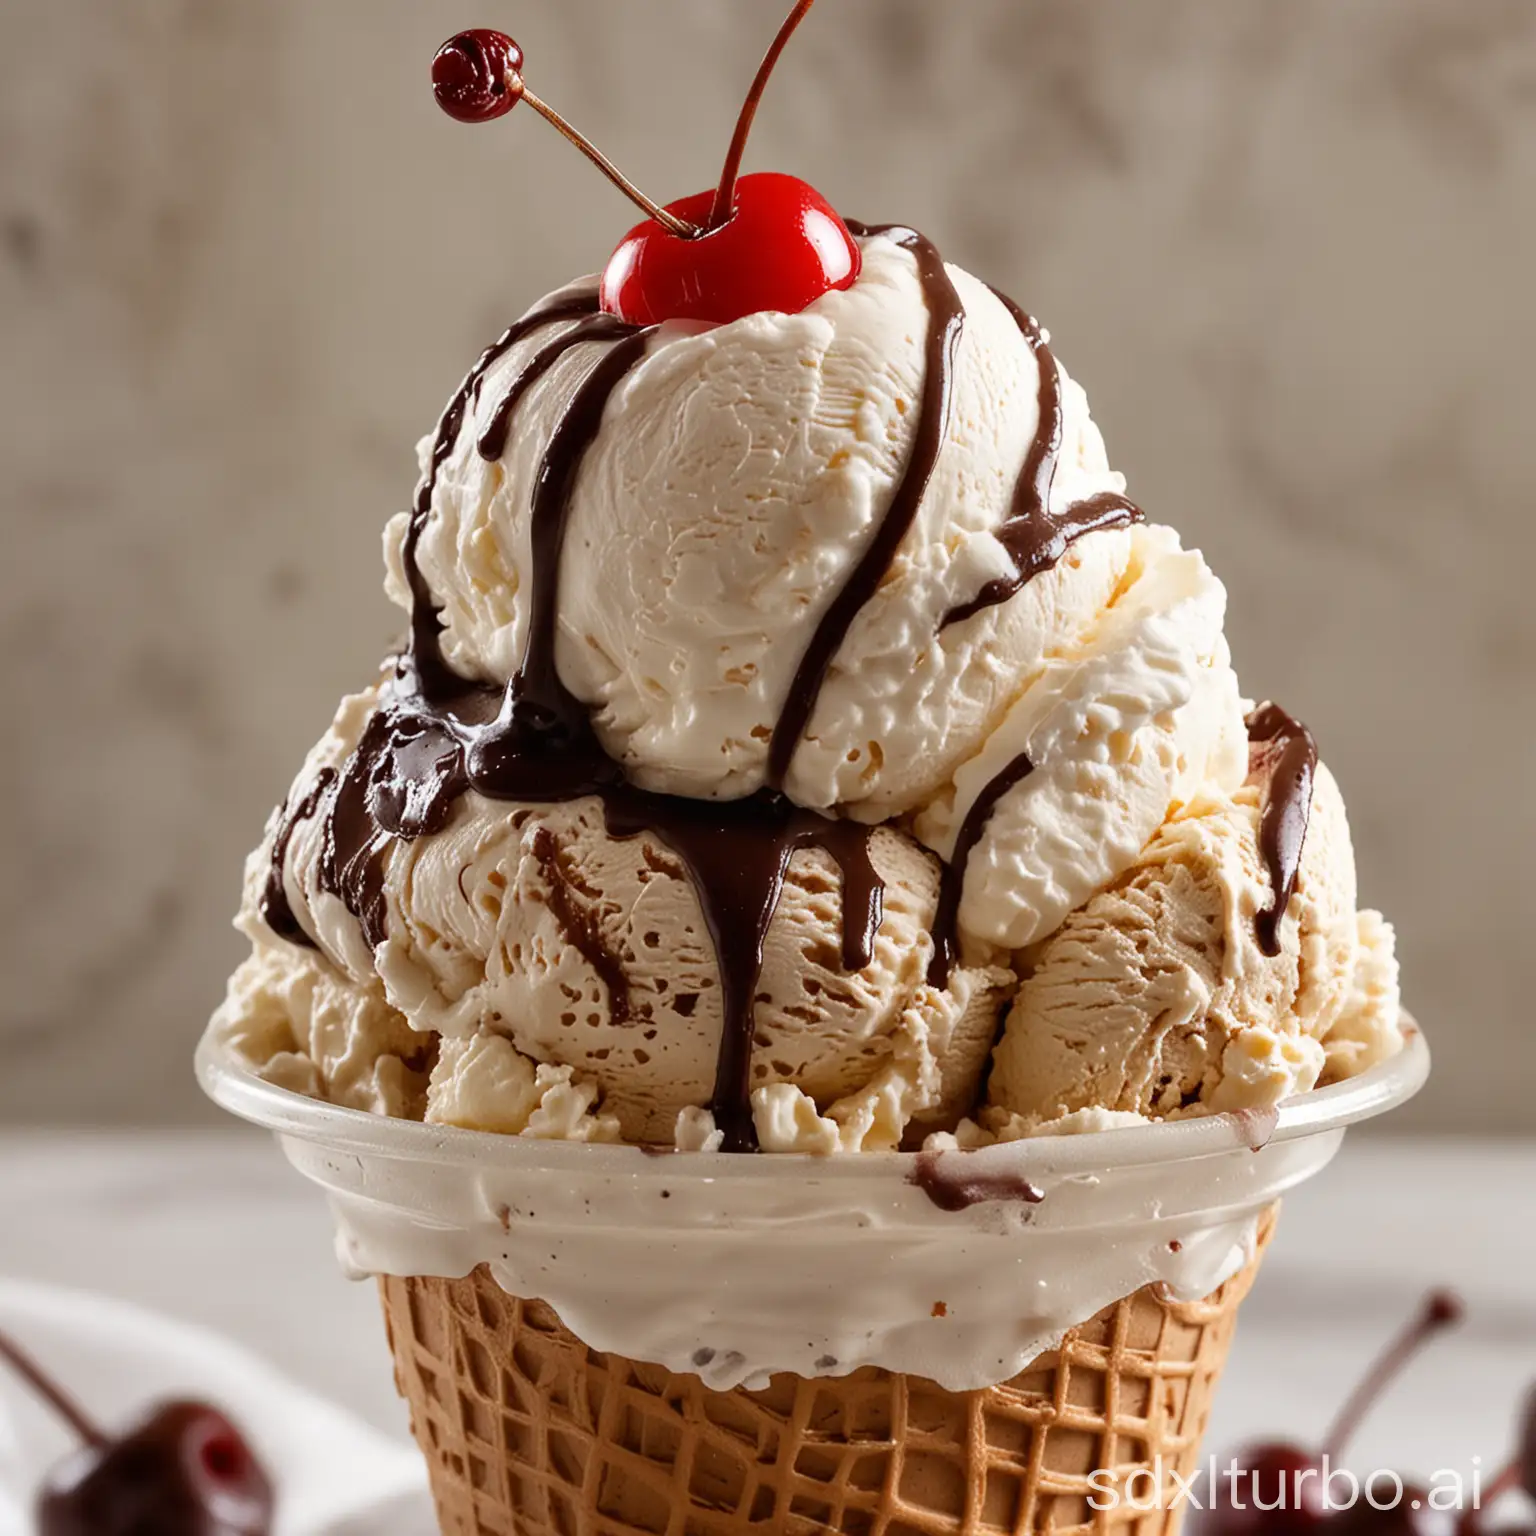 A close-up of a delicious-looking ice cream sundae. The sundae is made with a scoop of chocolate ice cream, a scoop of vanilla ice cream, whipped cream, chocolate sauce, and a cherry.